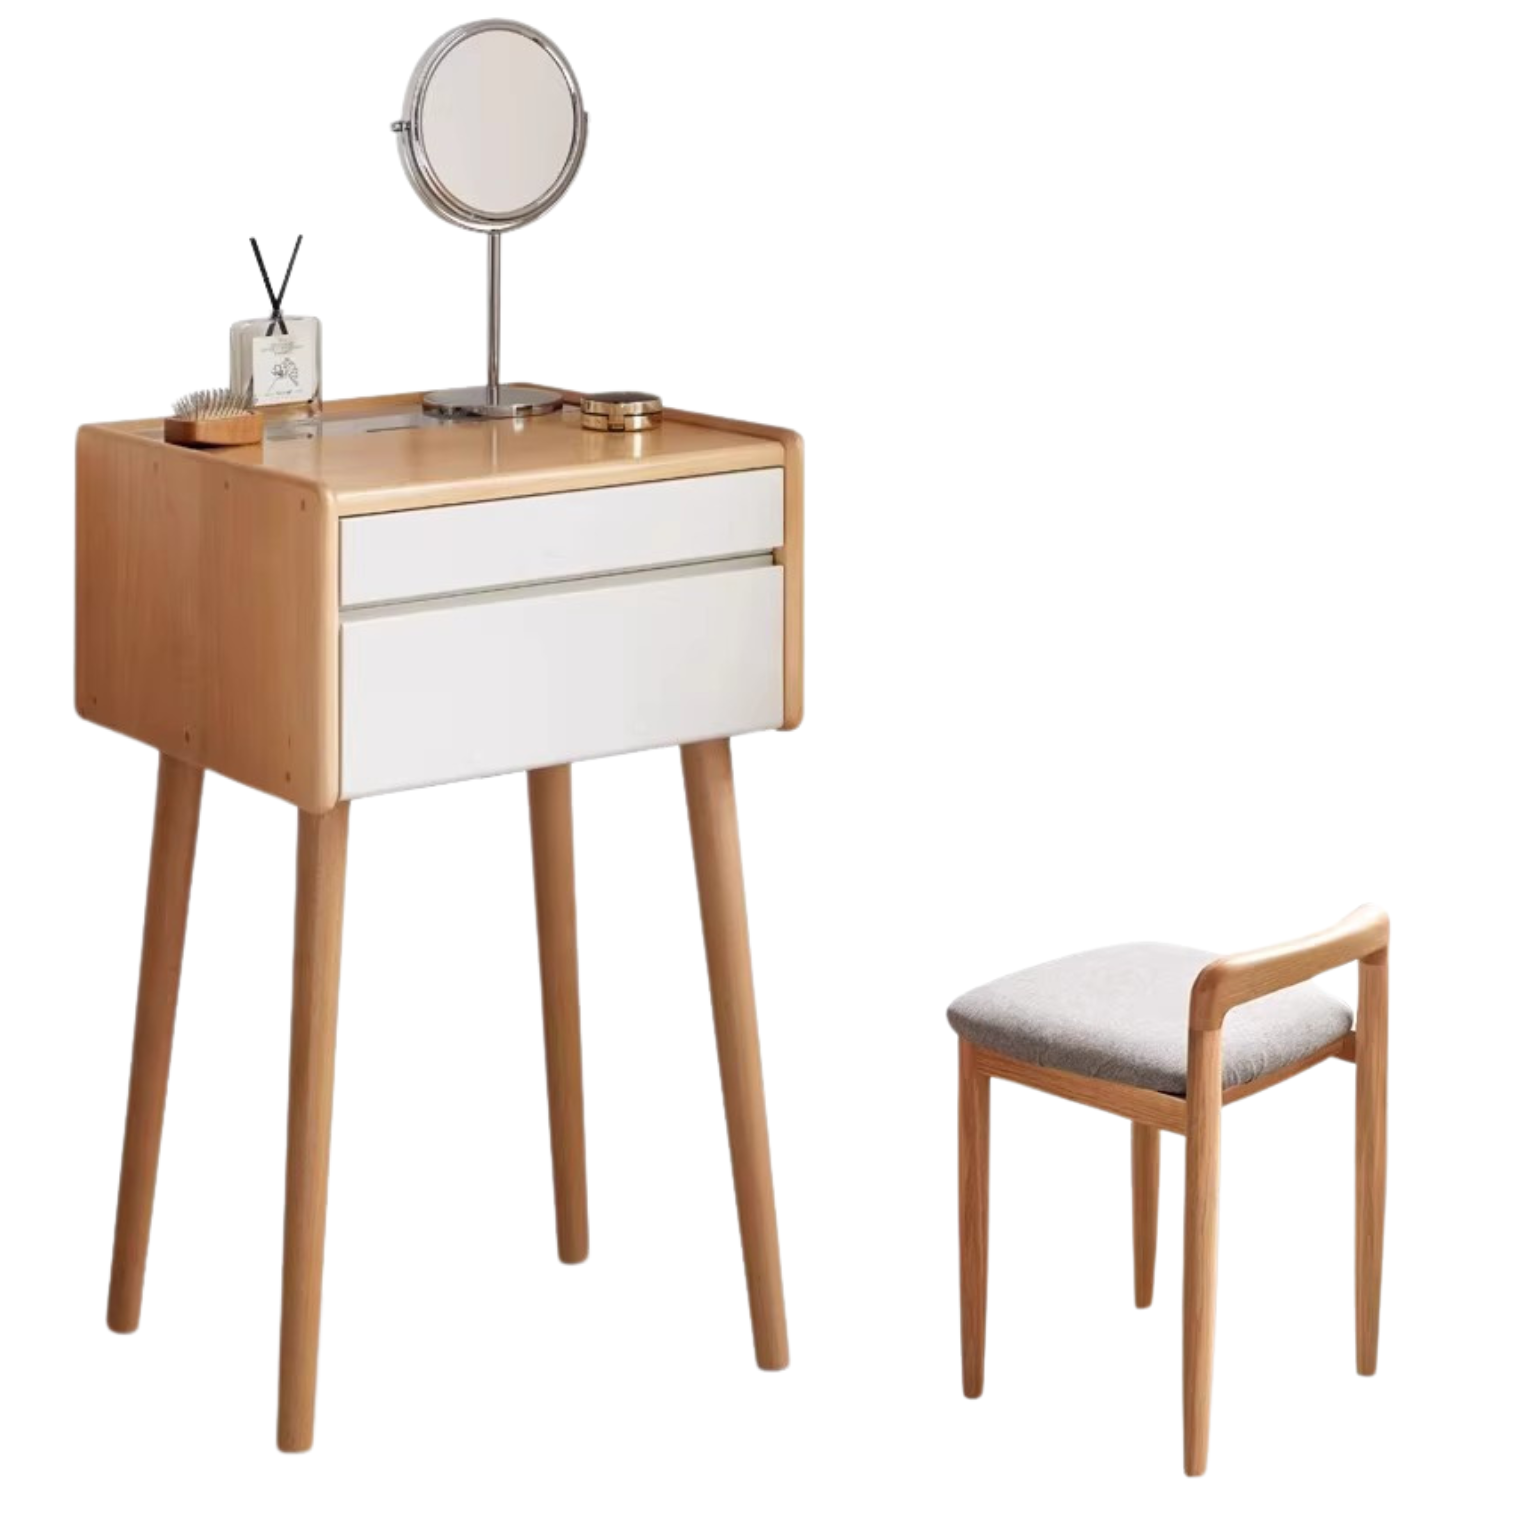 Beech Solid Wood Dressing Table Small Bedside Table: